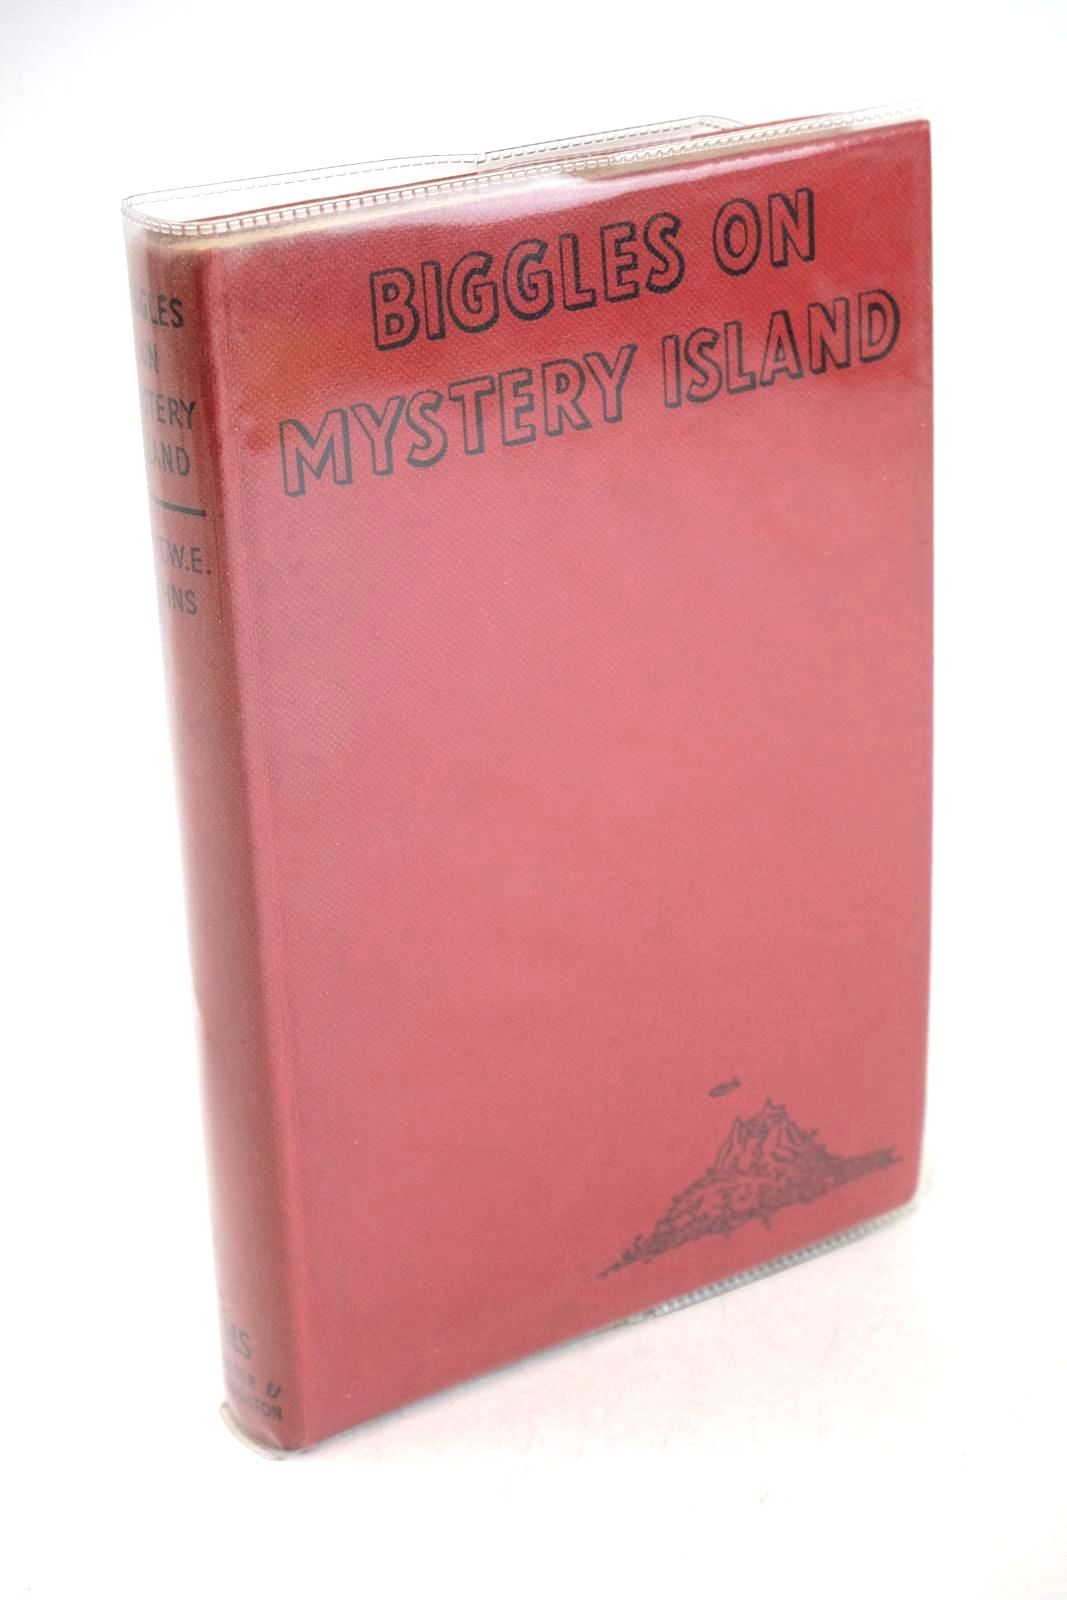 Photo of BIGGLES ON MYSTERY ISLAND- Stock Number: 1326557